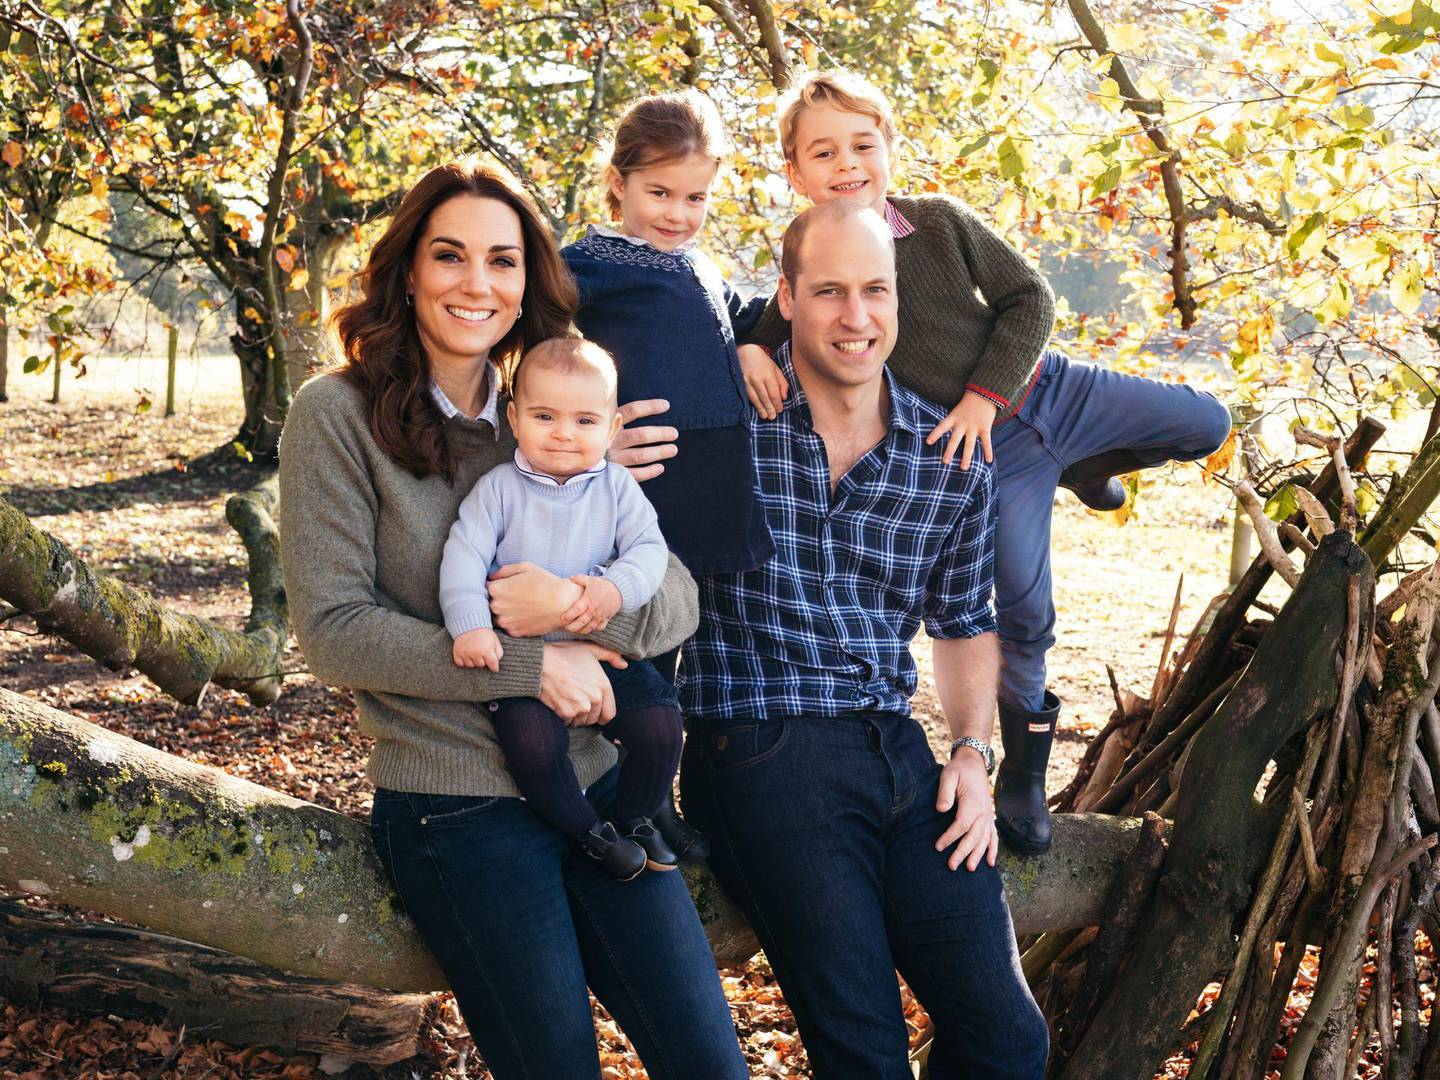 ANMER, UNITED KINGDOM:  **NO SALES** **NEWS EDITORIAL USE ONLY, NO COMMERCIAL USE**  (This photograph must not be used after 31st December 2019, without prior permission from Kensington Palace.) This handout photograph taken in the Autumn by Matt Porteous and supplied by Kensington Palace, shows Prince William, Duke of Cambridge and Catherine, Duchess of Cambridge with their three children, Prince Louis, Princess Charlotte and Prince George (right) at Anmer Hall in Norfolk, United Kingdom. This photograph features on their Royal Highnesses Christmas card this year. (Photo by Matt Porteous/Kensington Palace via Getty Images)

NEWS EDITORIAL USE ONLY. NO COMMERCIAL USE (including any use in merchandising, advertising or any other non-editorial use including, for example, calendars, books and supplements). This photograph is provided to you strictly on condition that you will make no charge for the supply, release or publication of it and that these conditions and restrictions will apply (and that you will pass these on) to any organisation to whom you supply it. All other requests for use should be directed to the Press Office at Kensington Palace in writing. The photograph must include all of the individuals when published.